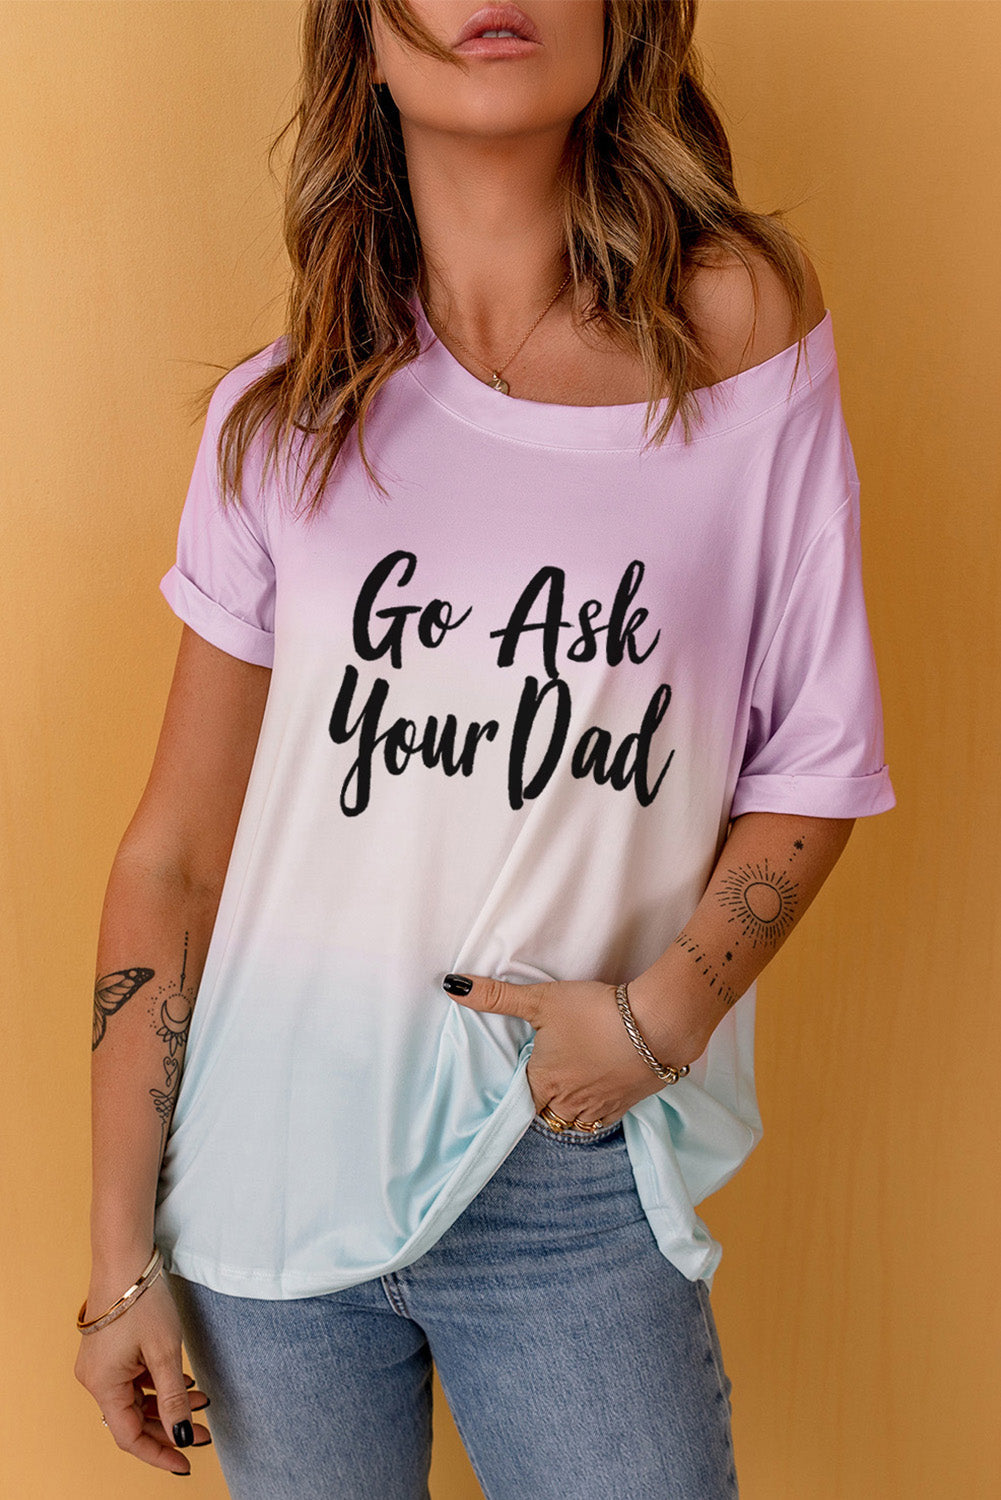 GO ASK YOUR DAD Graphic Tee - T-Shirts - Shirts & Tops - 1 - 2024